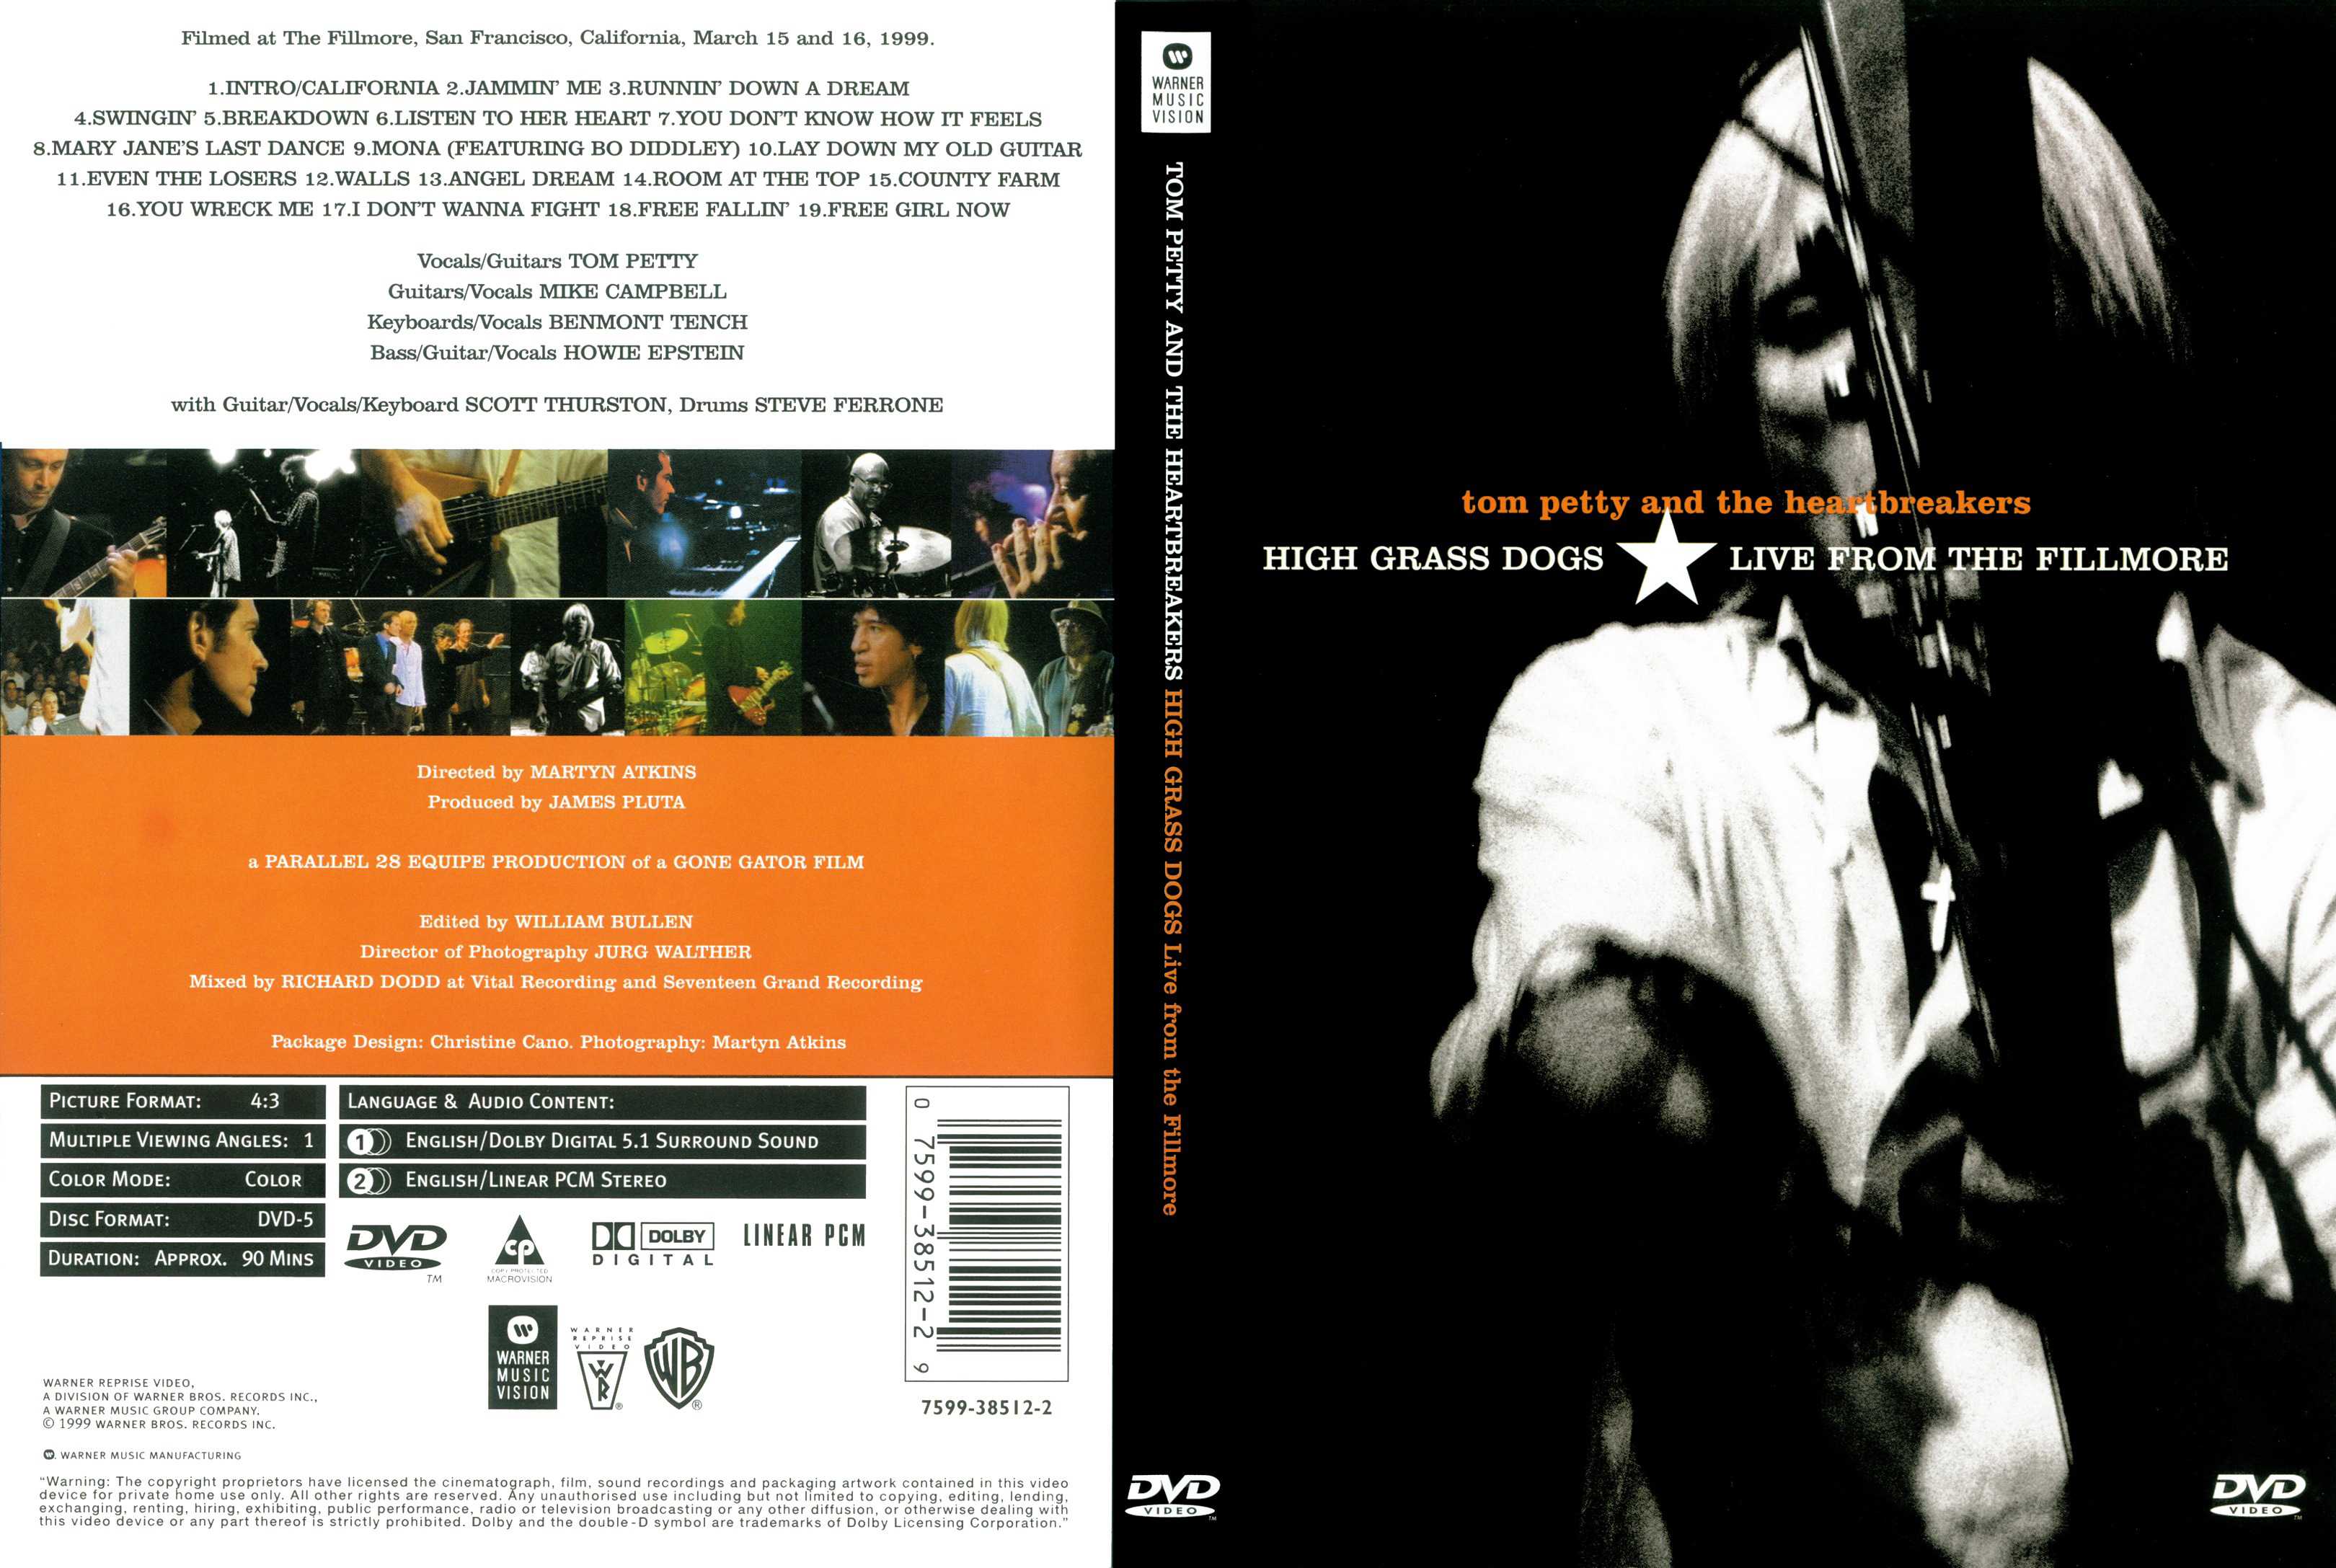 Jaquette DVD Tom Petty high grass dogs live from the fillmore